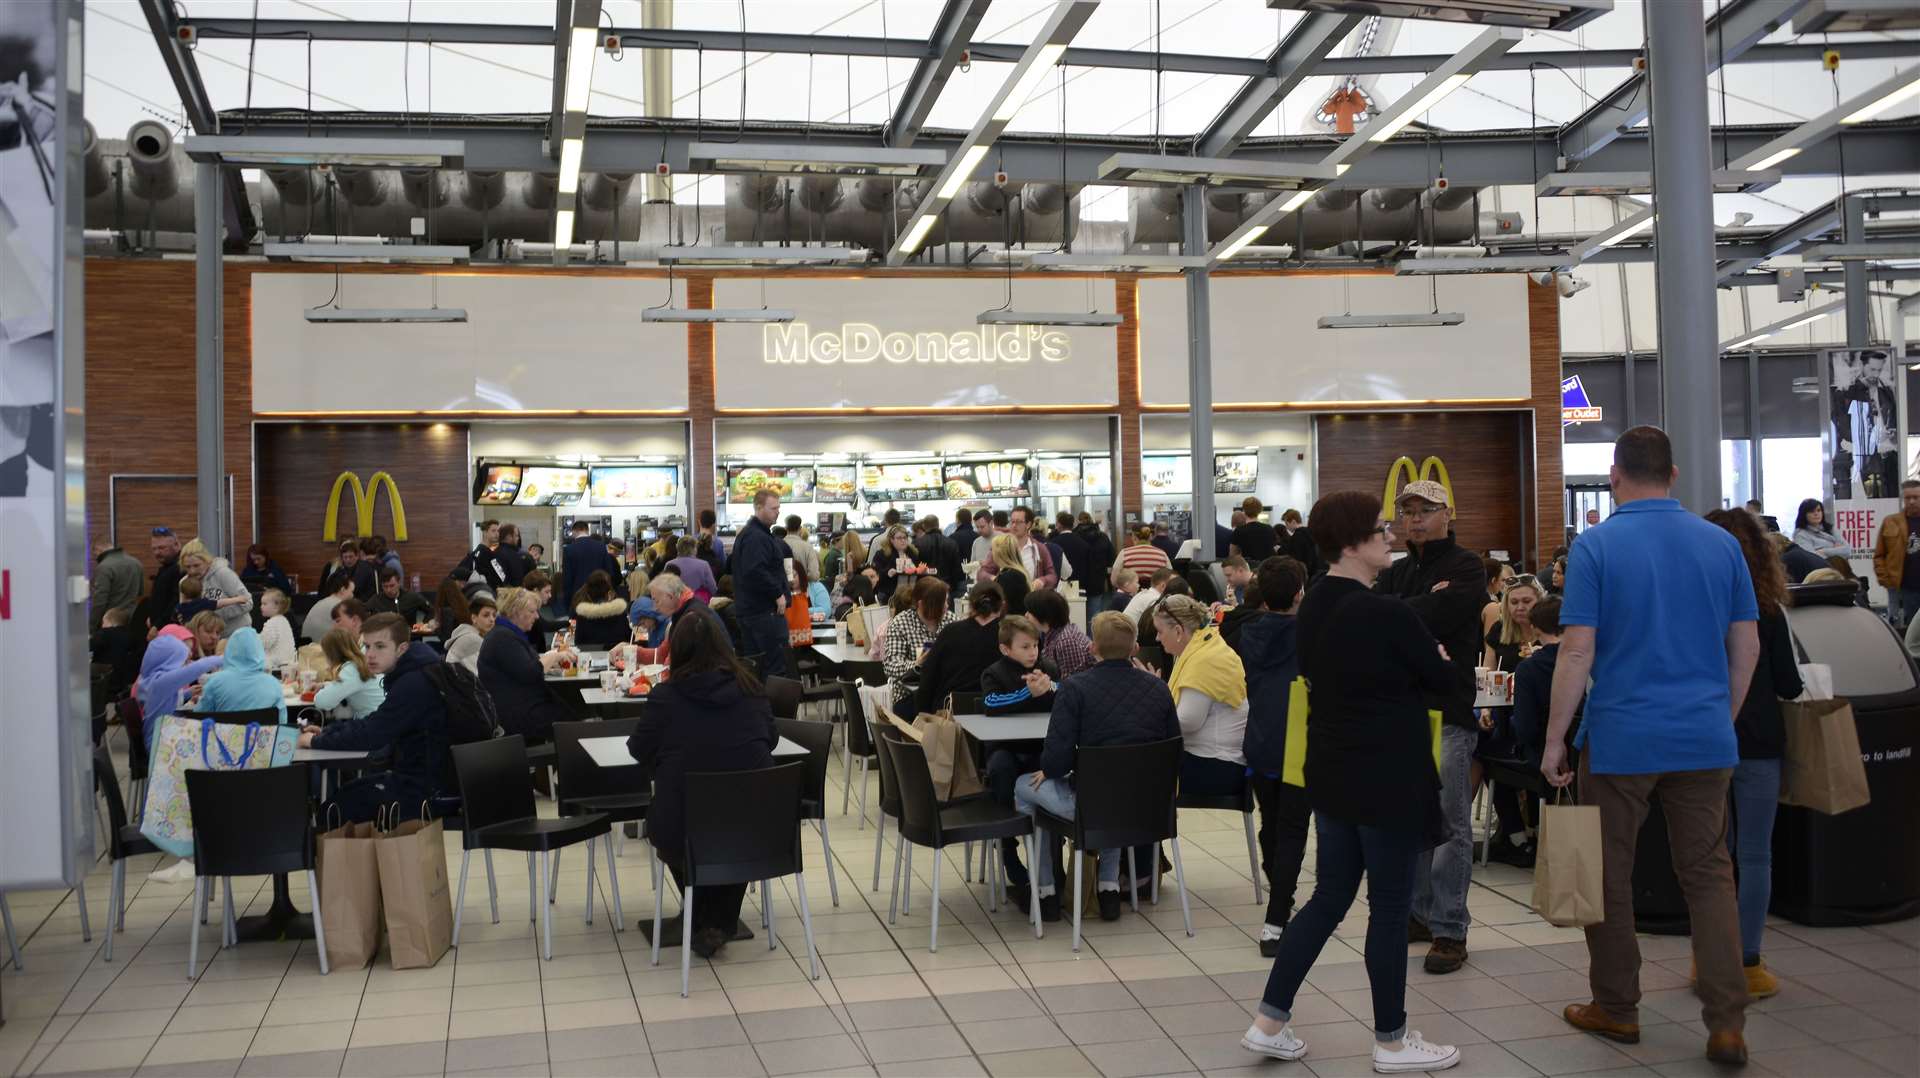 The Outlet’s food court – seen here in 2016 – was demolished as part of the 2019 extension